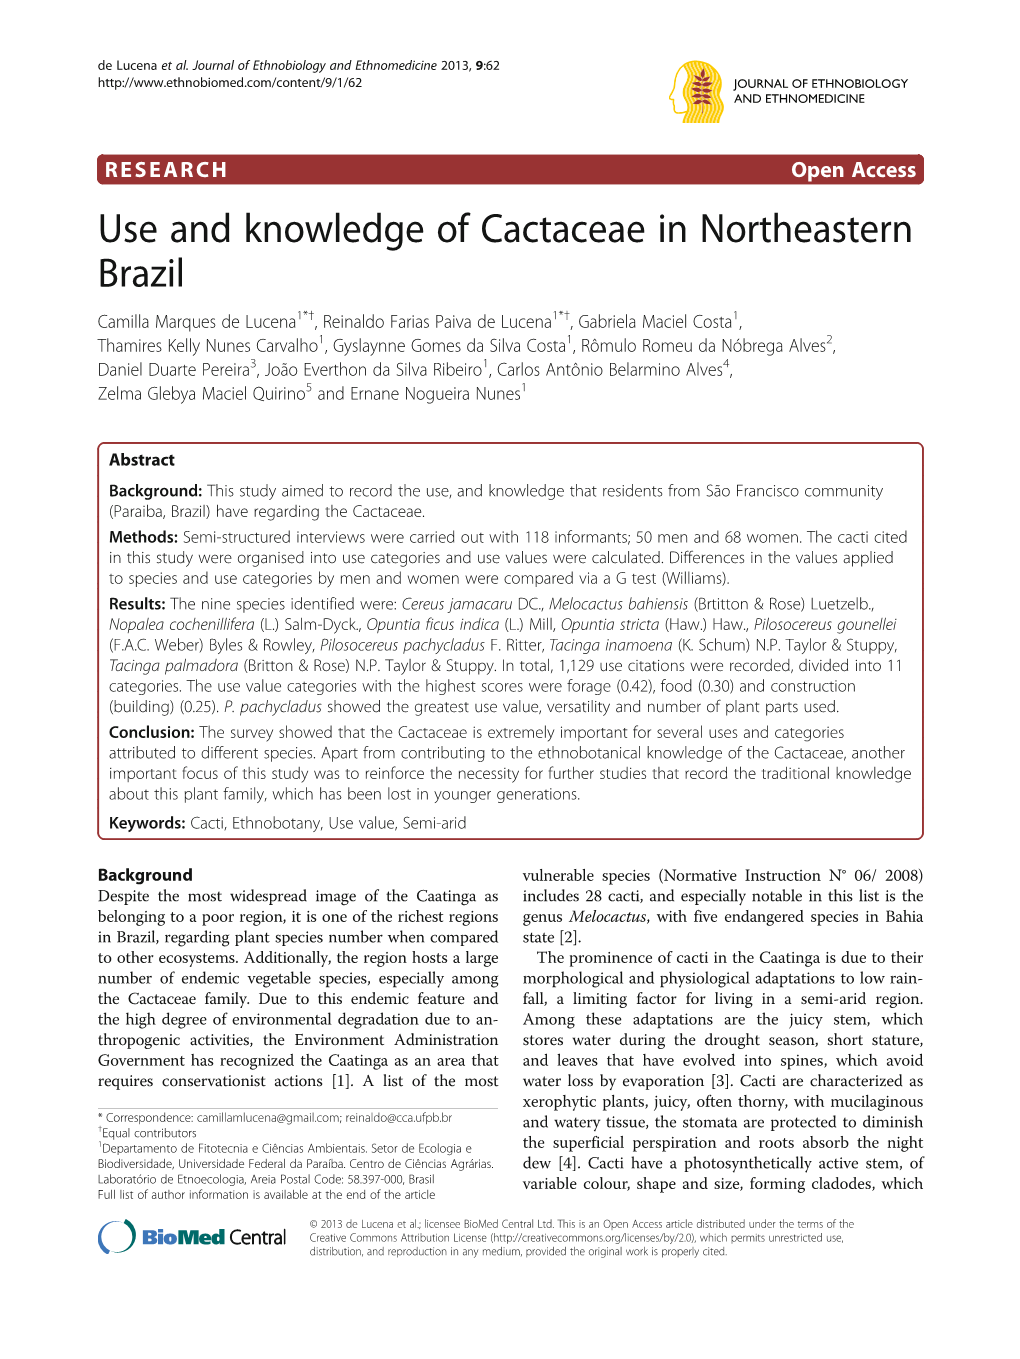 Use and Knowledge of Cactaceae in Northeastern Brazil